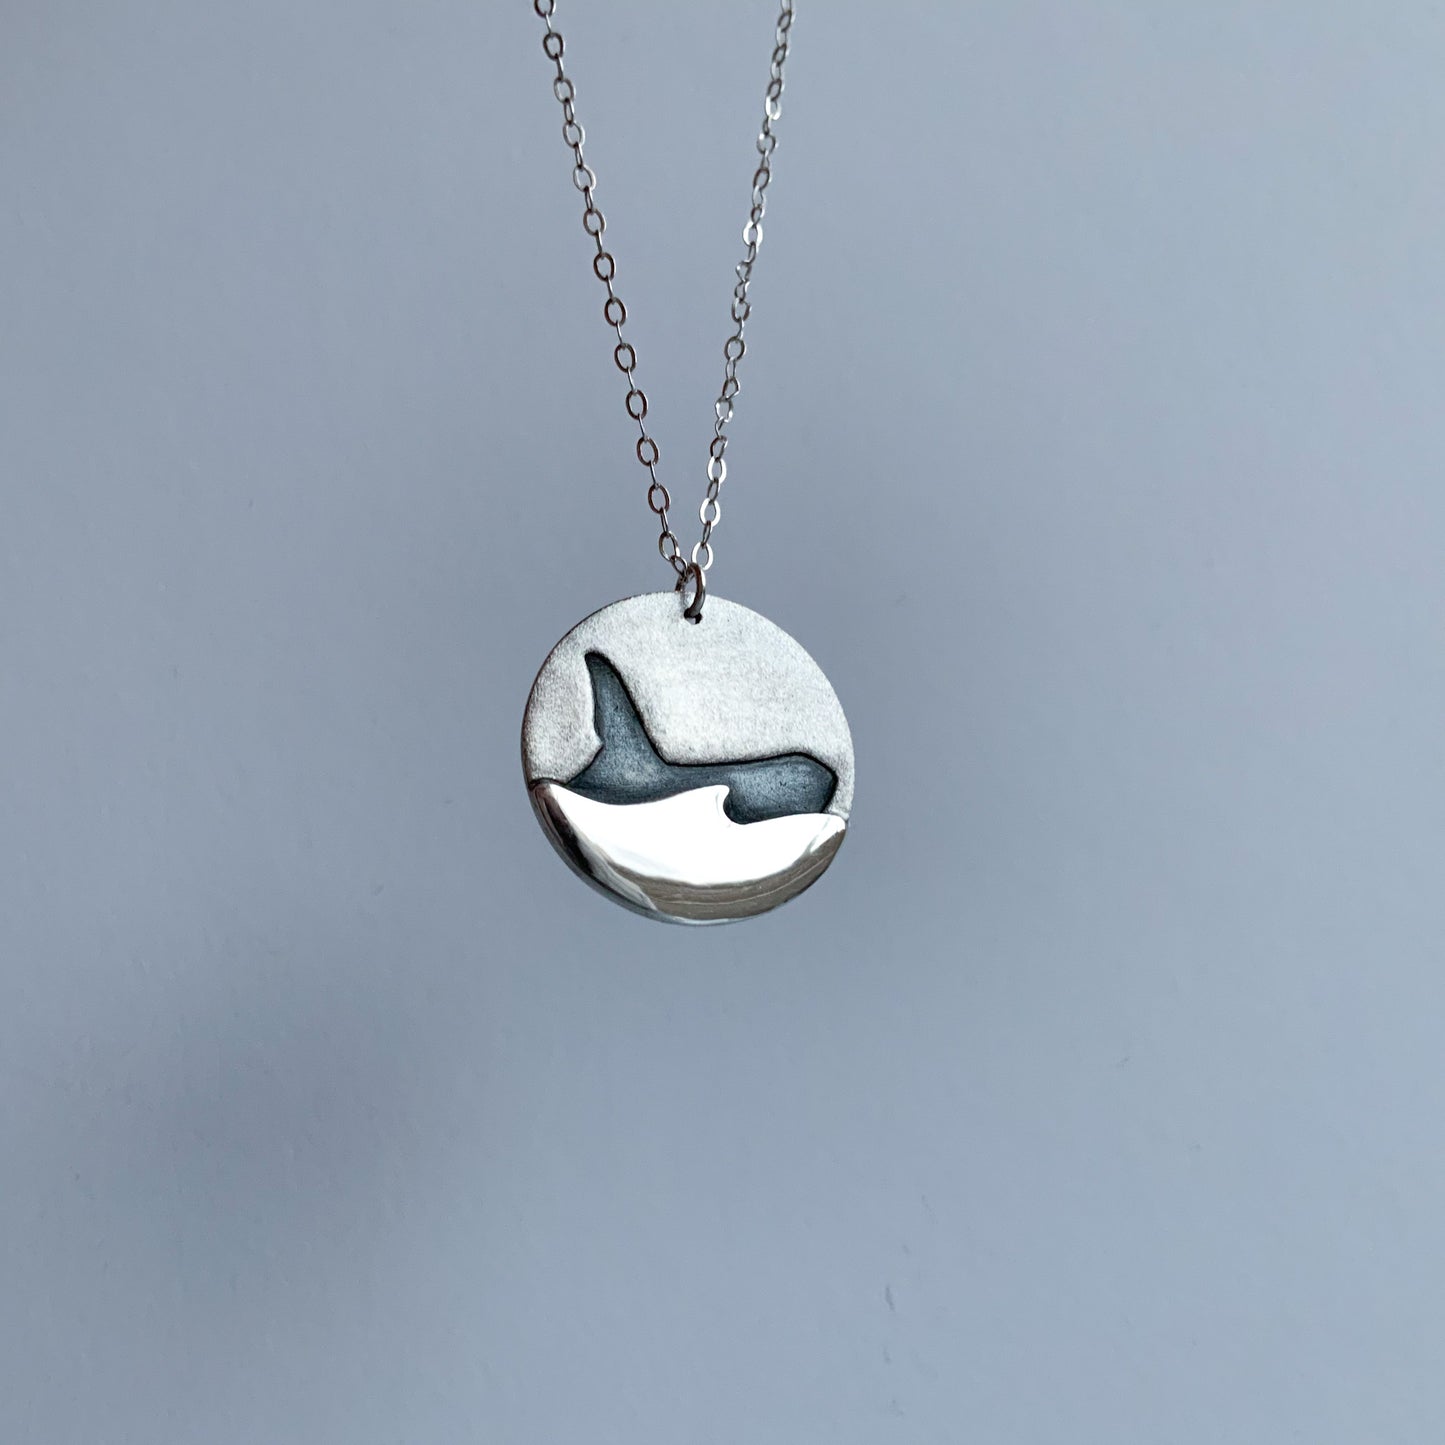 John Coe Scottish orca necklace in Sterling Silver.